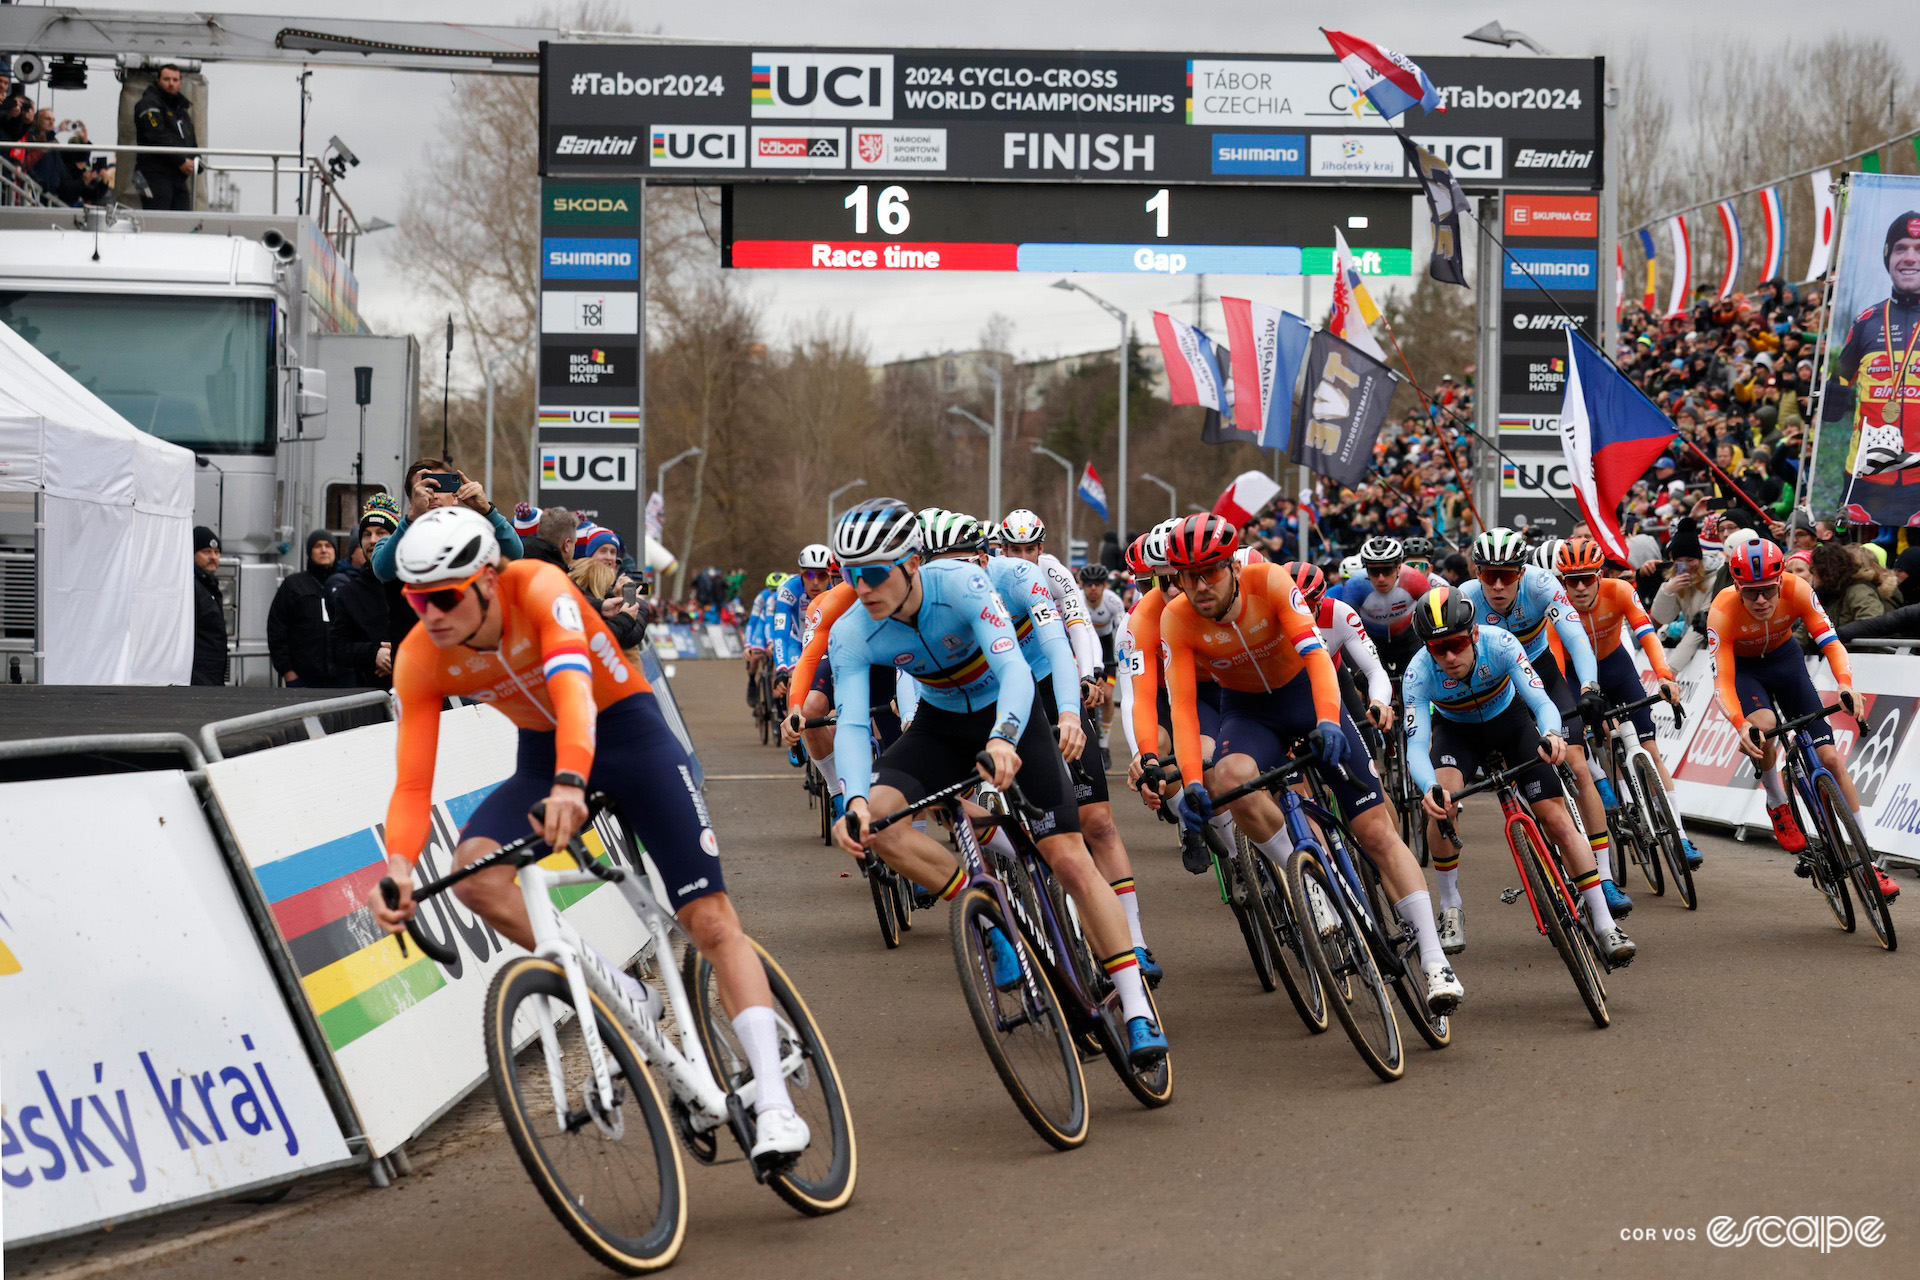 Dutch rider Mathieu van der Poel leads the men's field off the start line at the 2024 Cyclocross World Championships in Tábor.